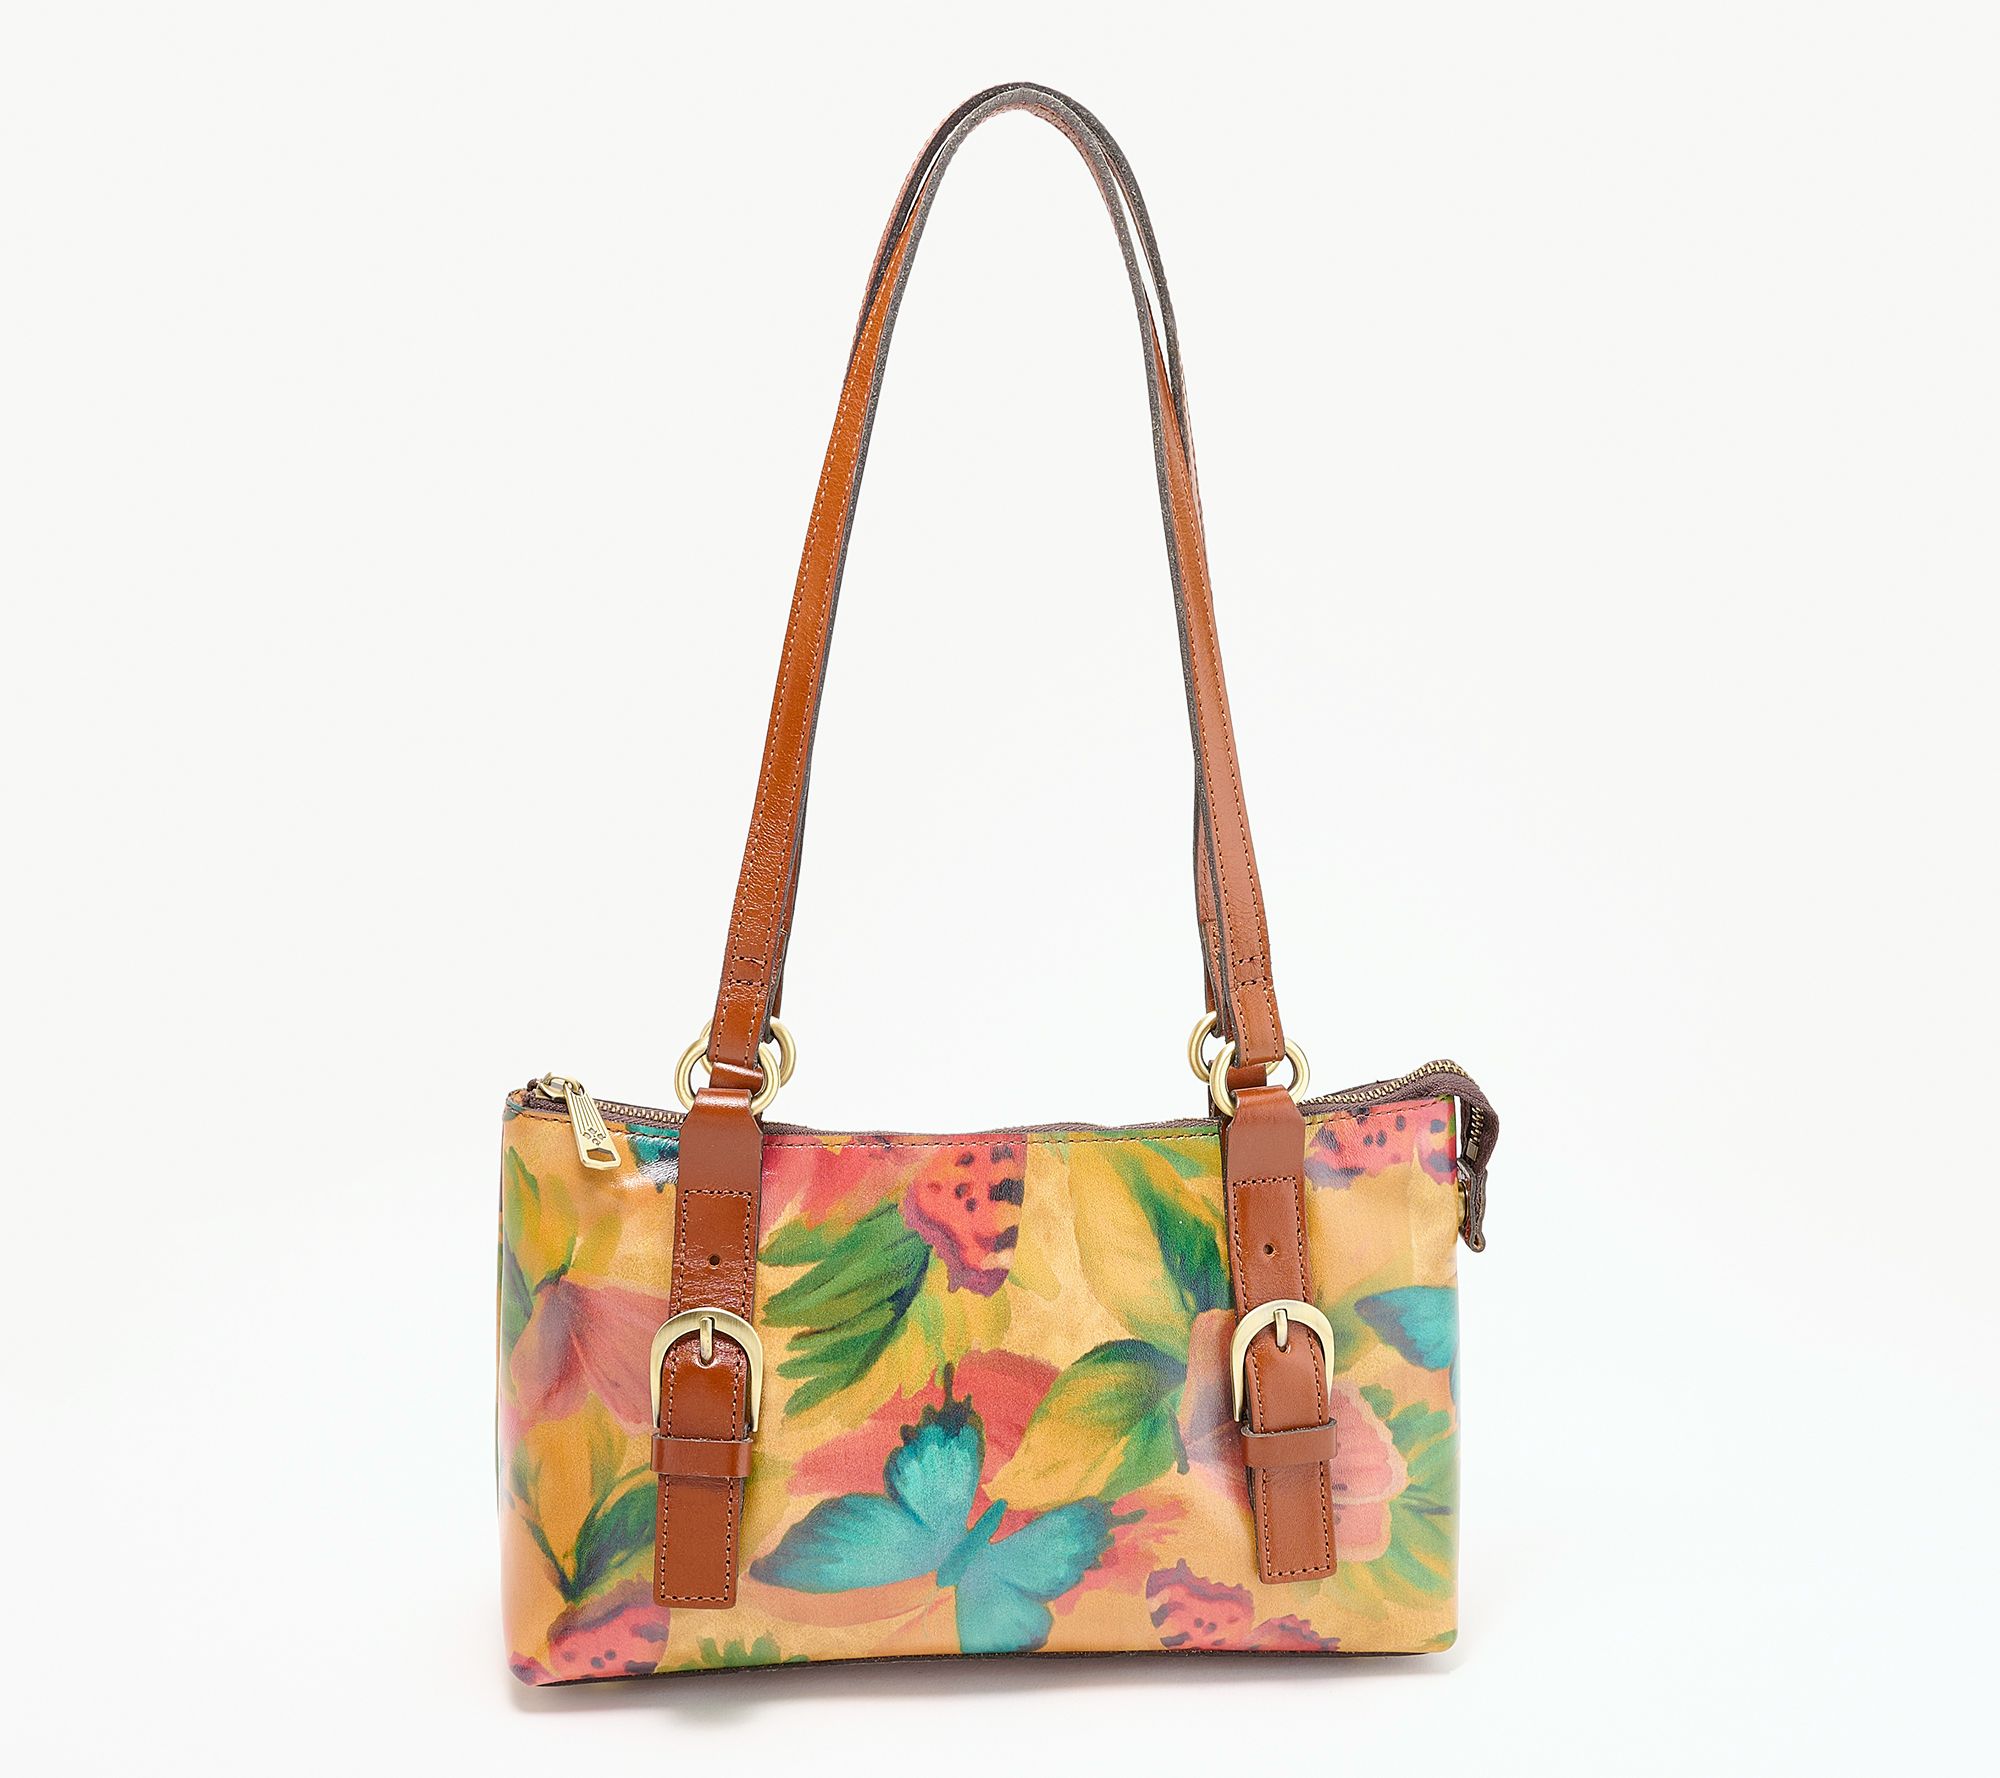 Stone Mountain Floral Leather Exterior Bags & Handbags for Women for sale